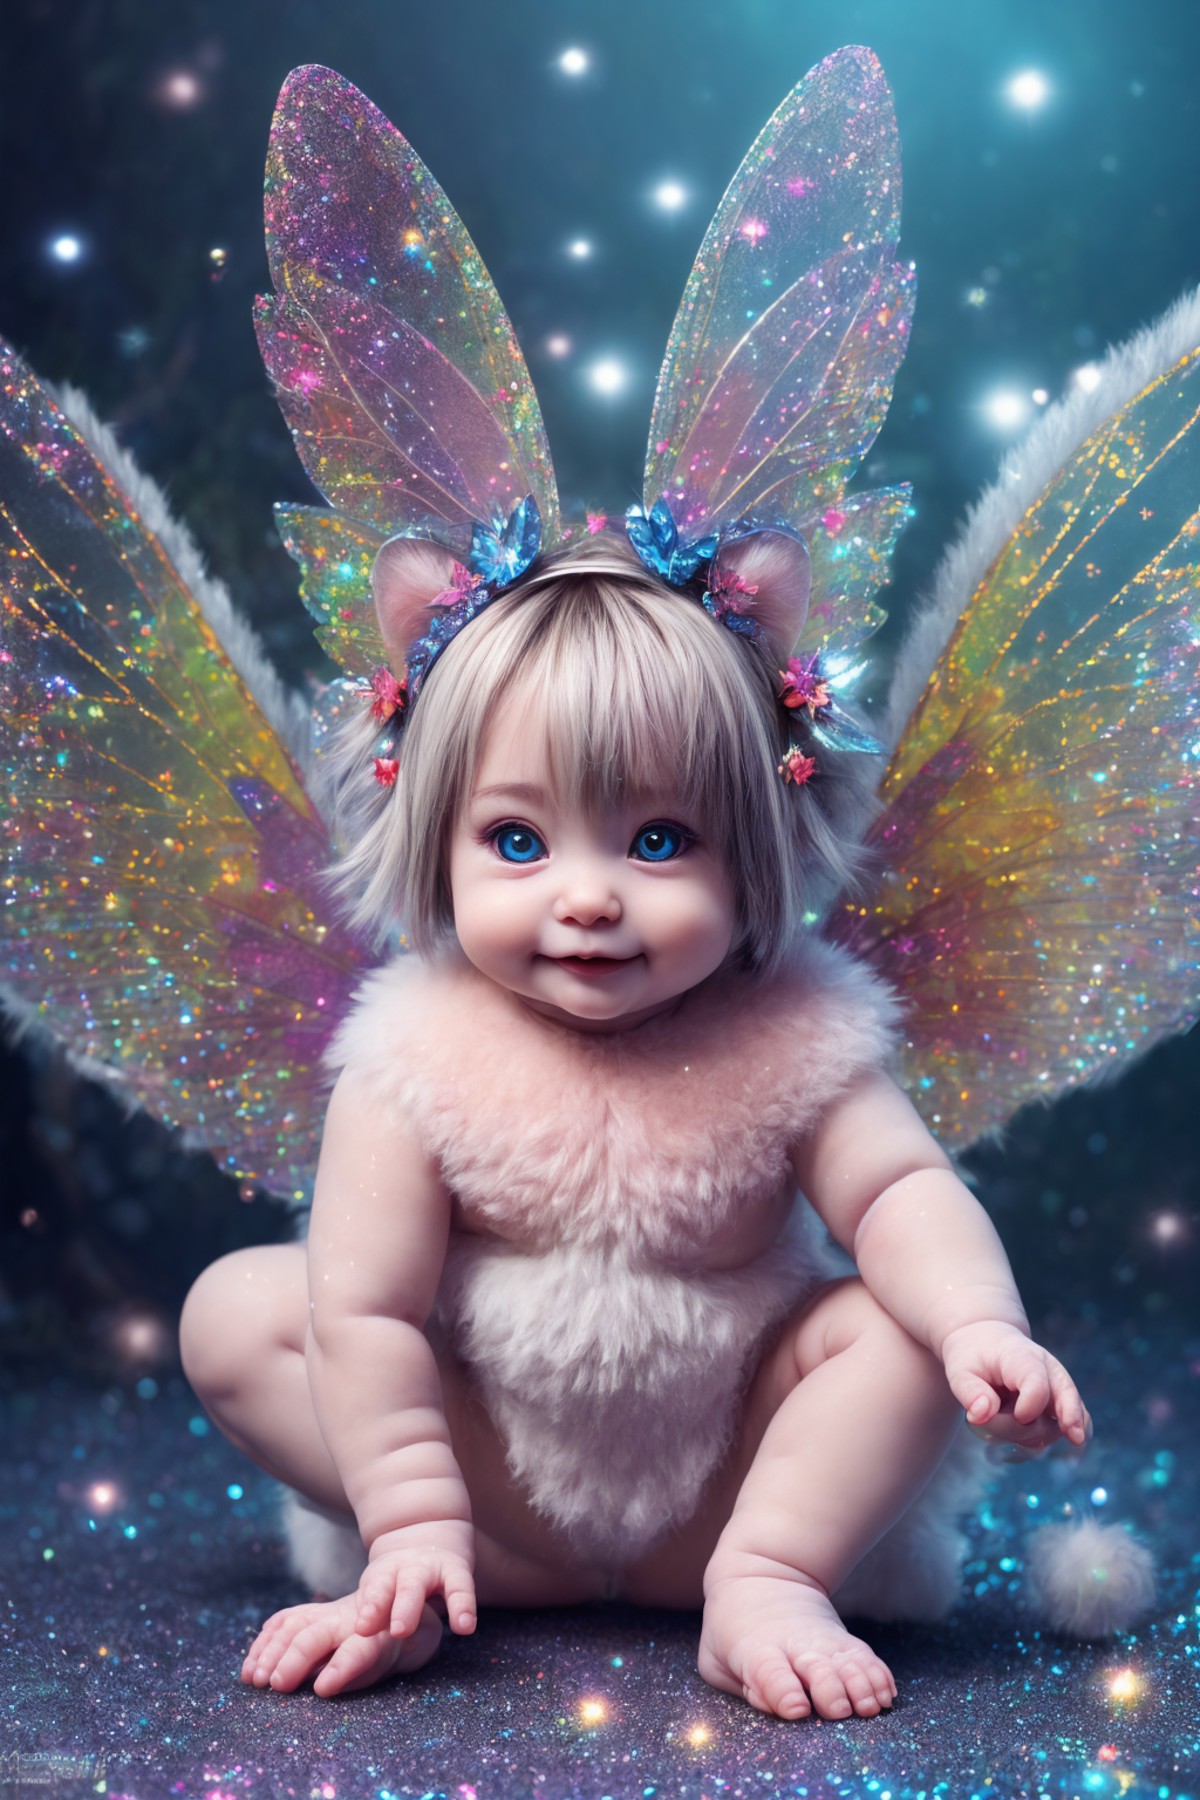 masterpiece), ((photorealistic ultra-detailed image, little, adorable, rounded strange smiling baby creature)), ((ultra-de...